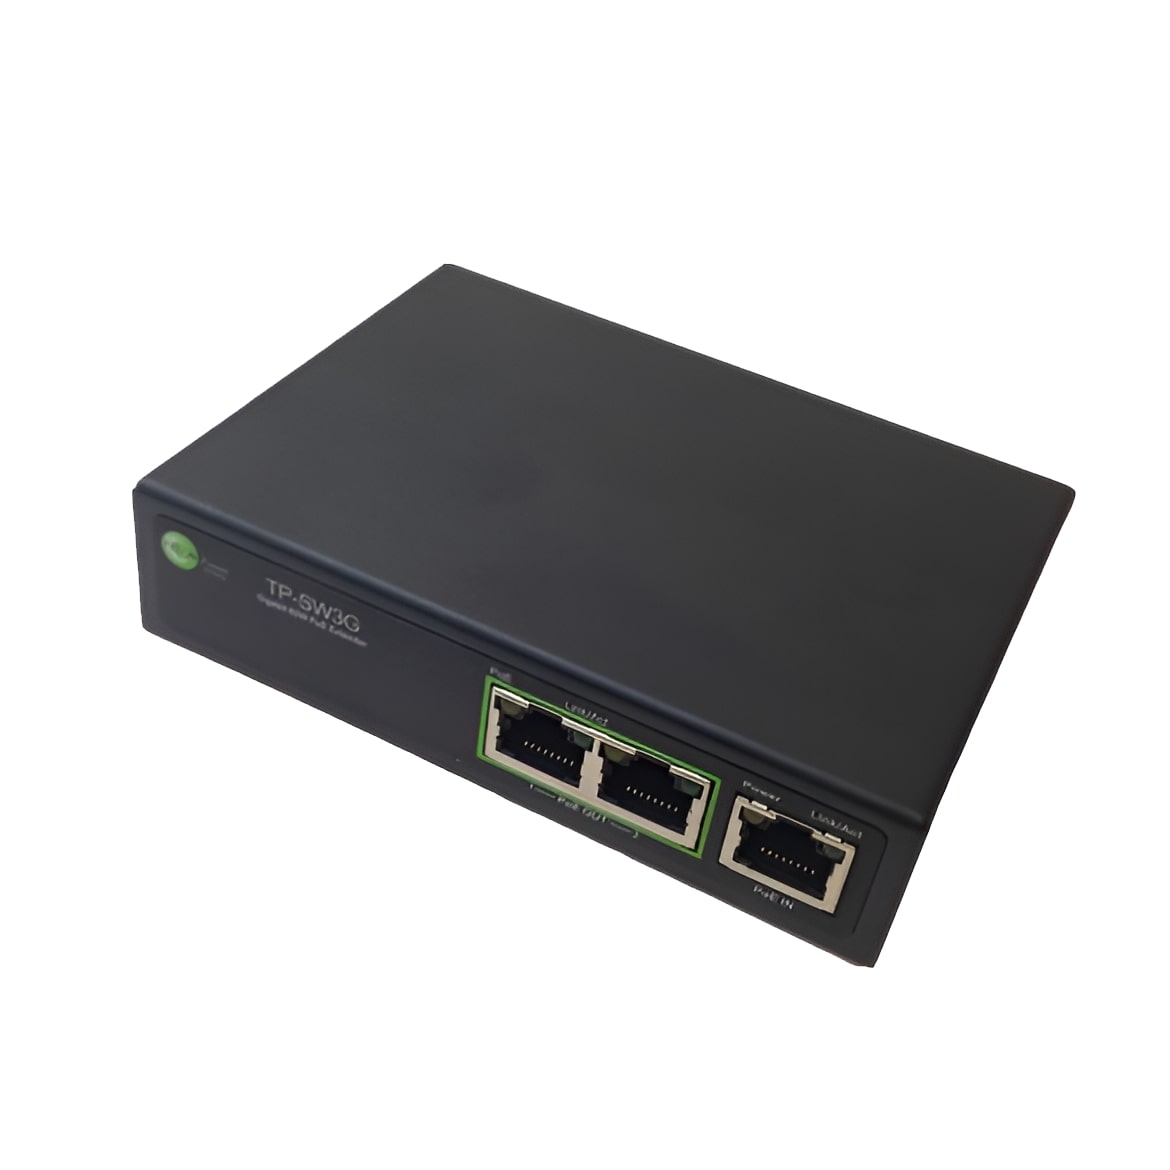 Poe ieee 802.3 at